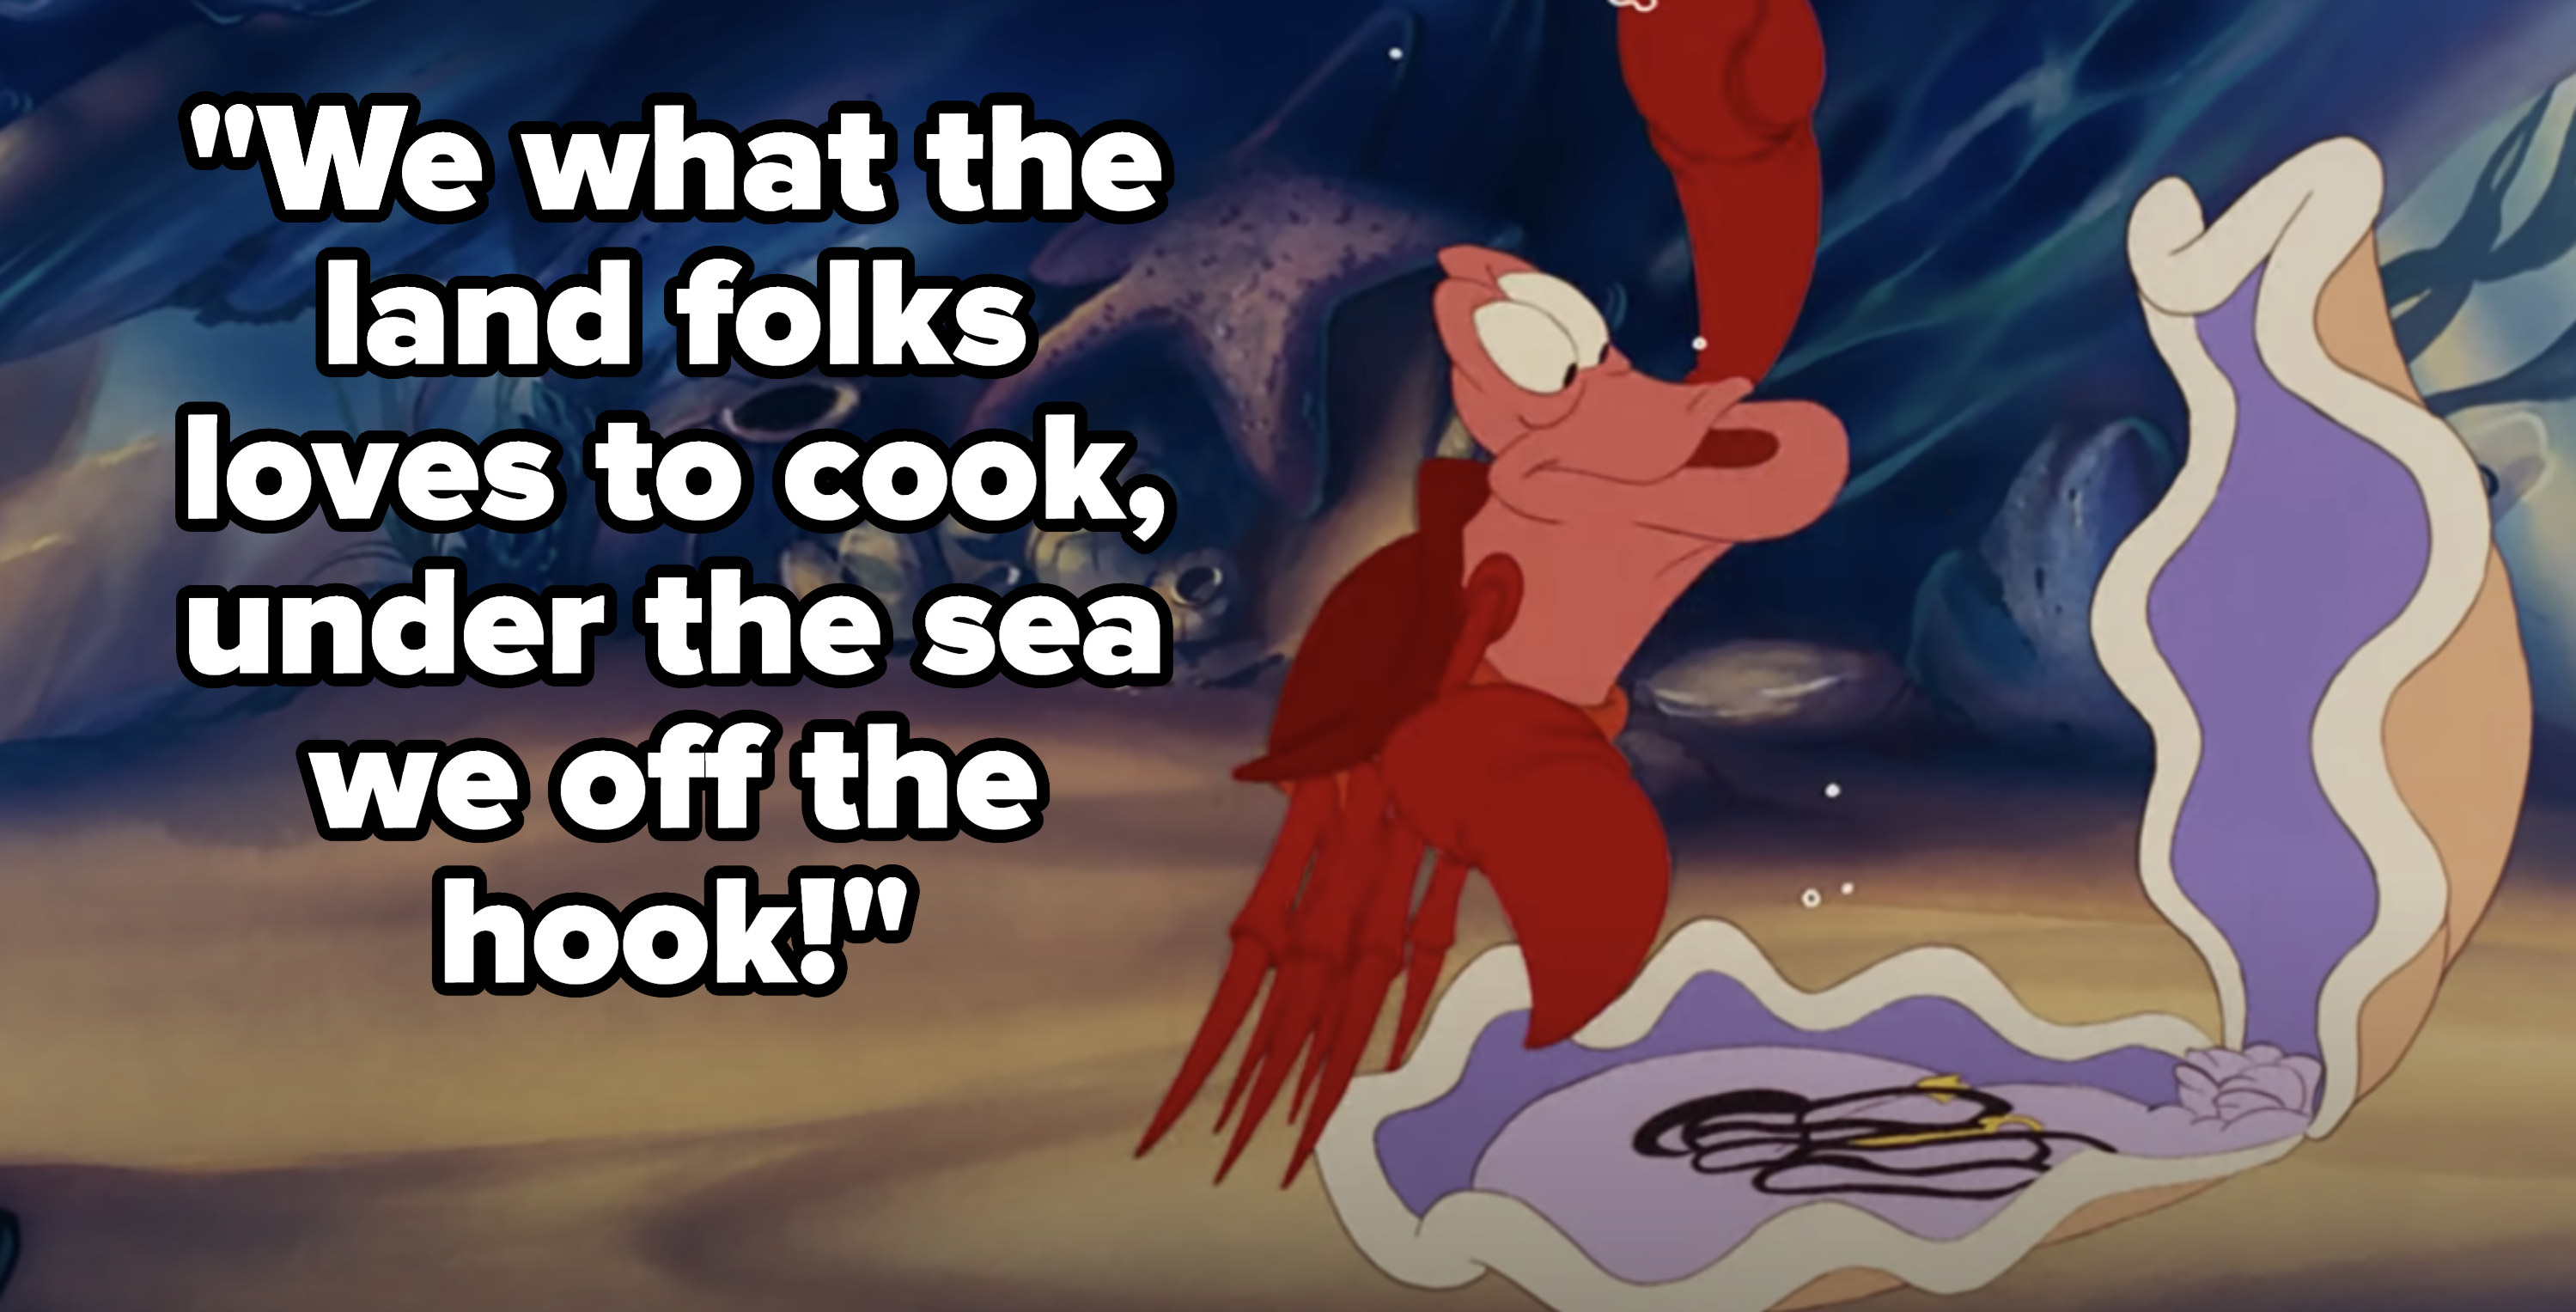 Sebastian singing &quot;We what the land folks loves to cook, under the sea we off the hook!&quot;